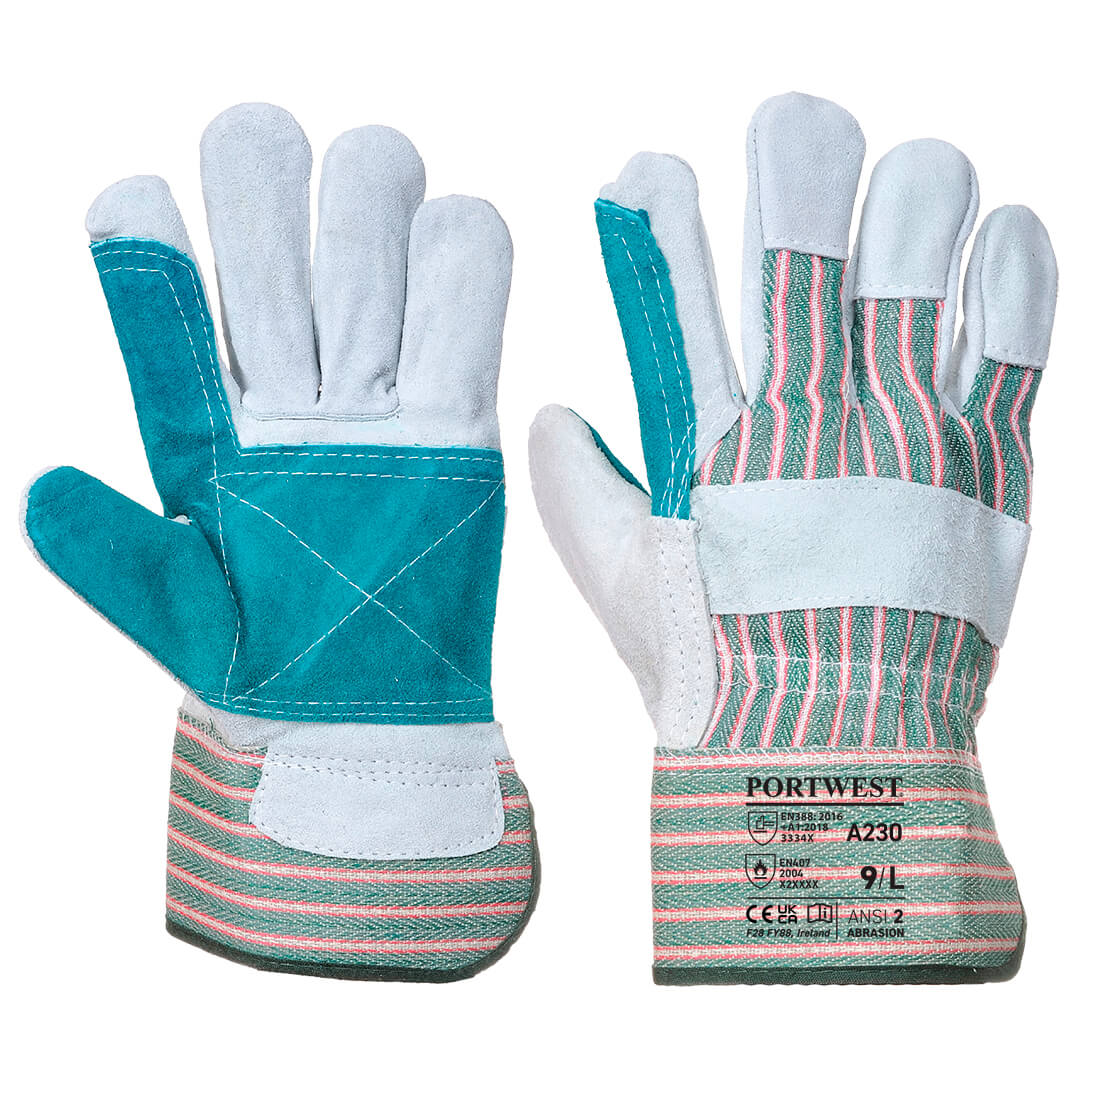 Double Palm Rigger Glove - Grey